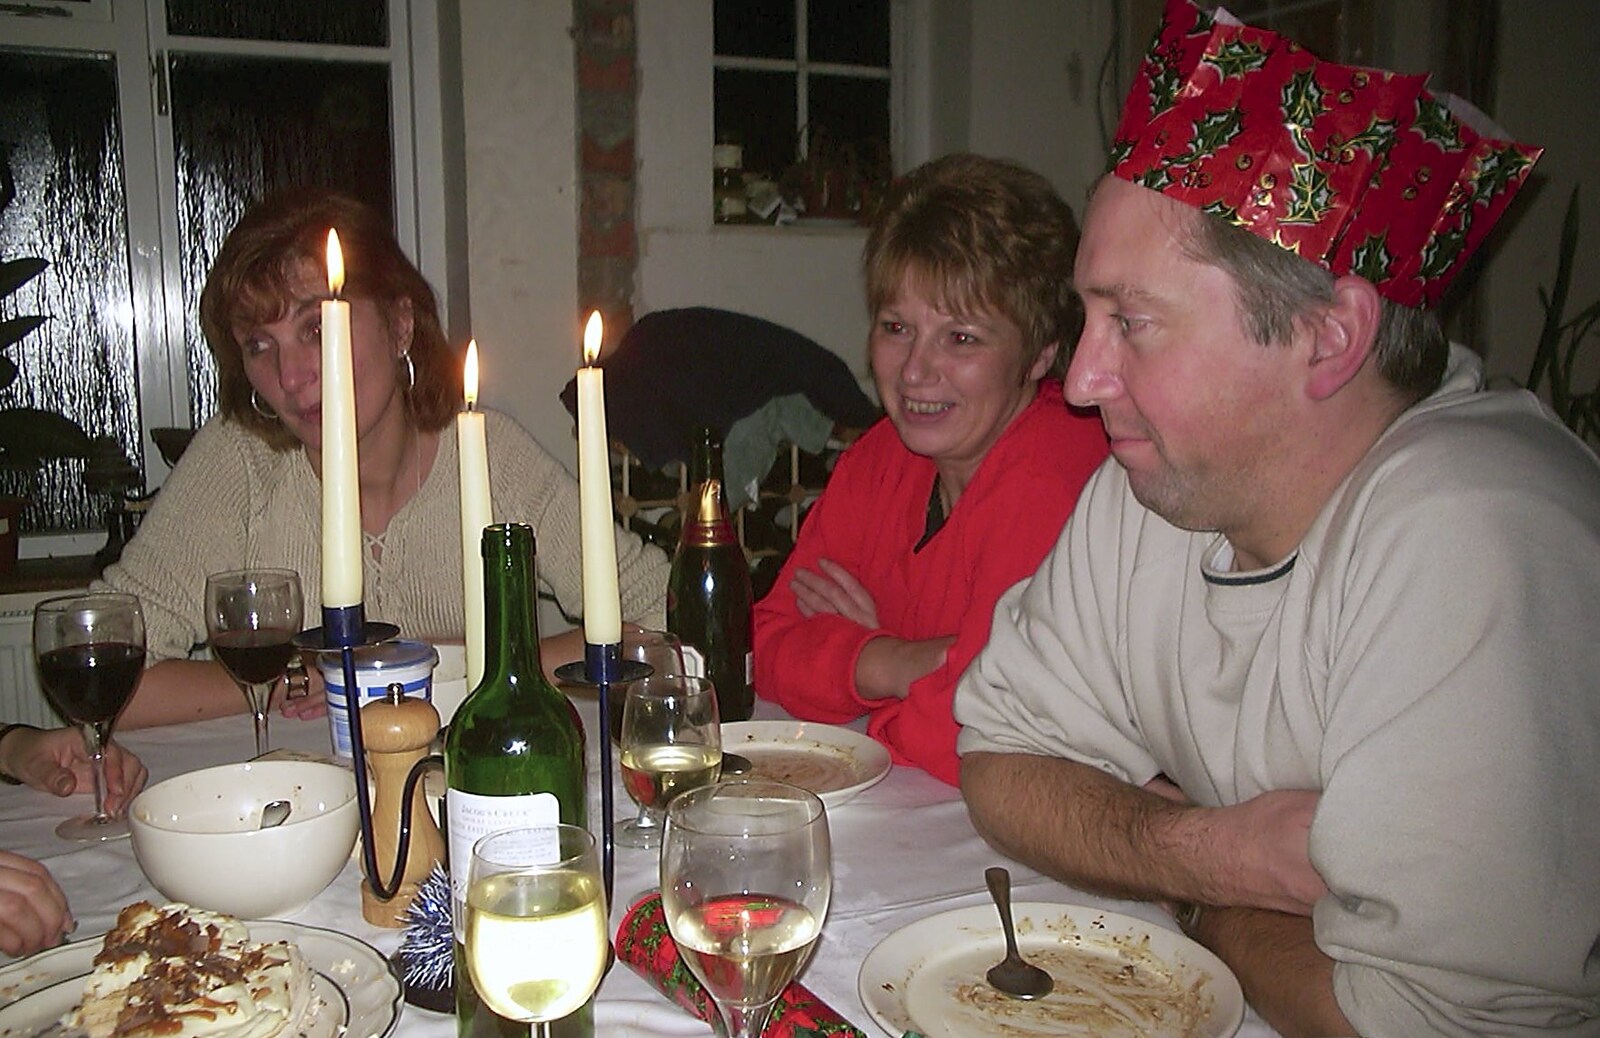 Anne, Nigel and Jenny from Christmas Day at Nosher's, Brome, Suffolk - 25th December 2002